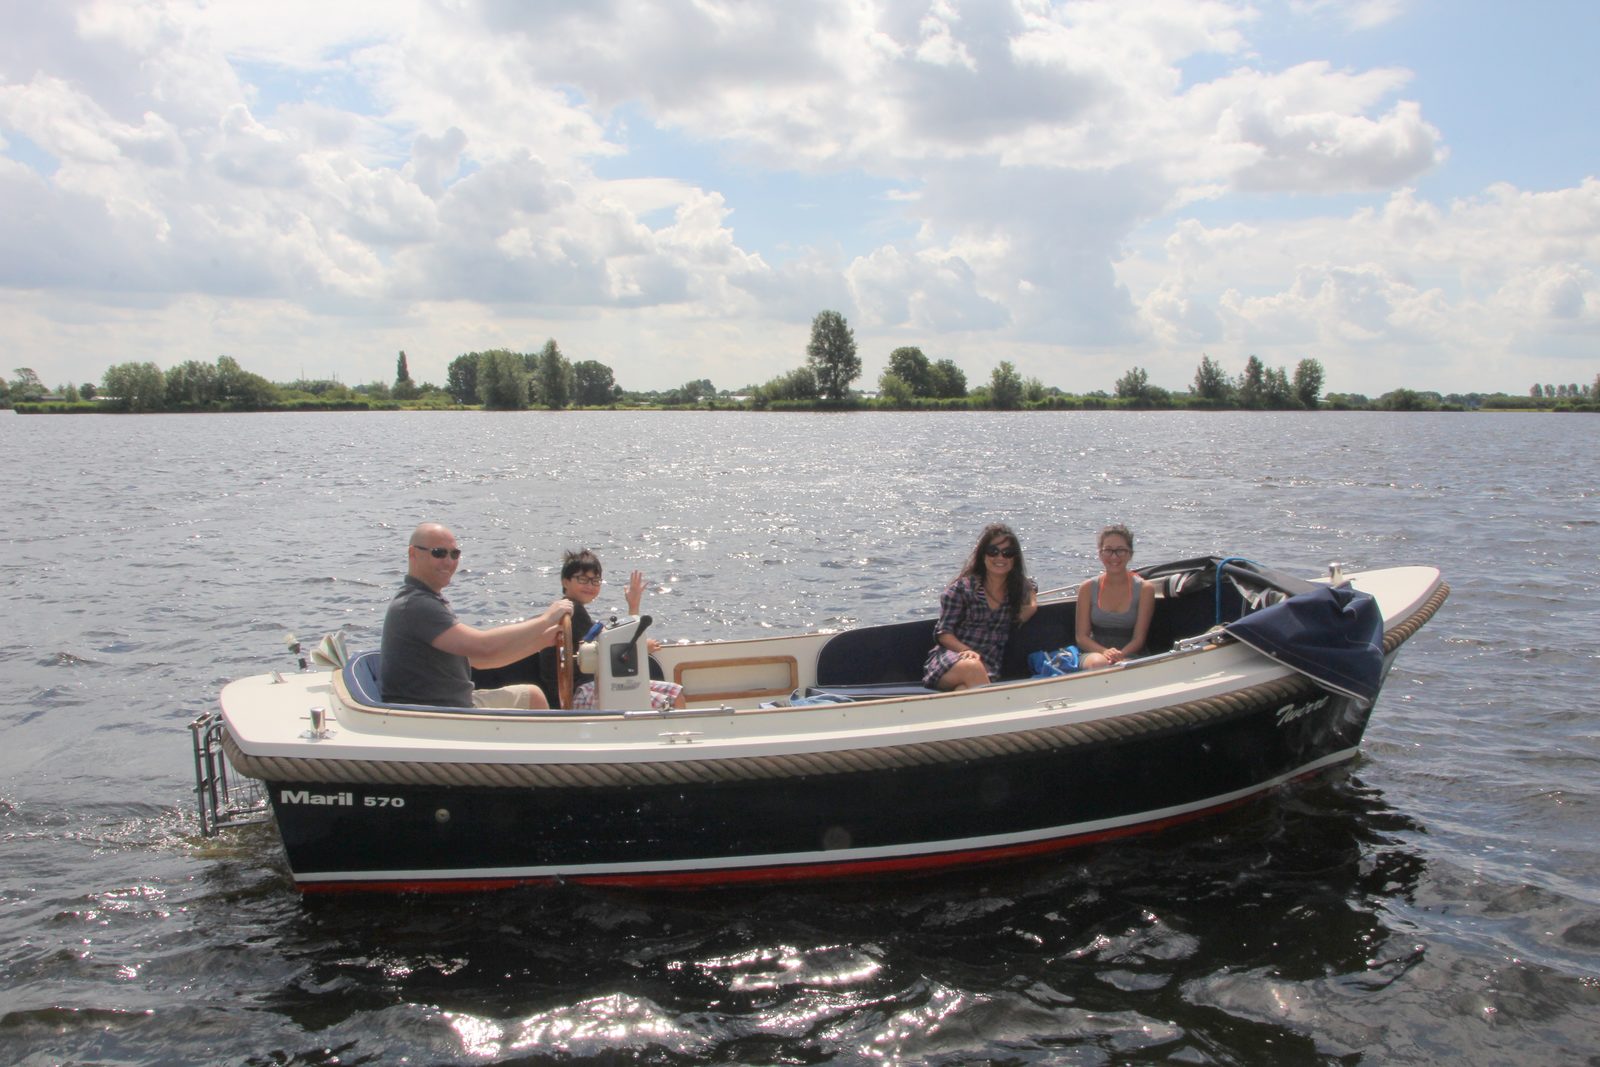 Boat rental to park guests